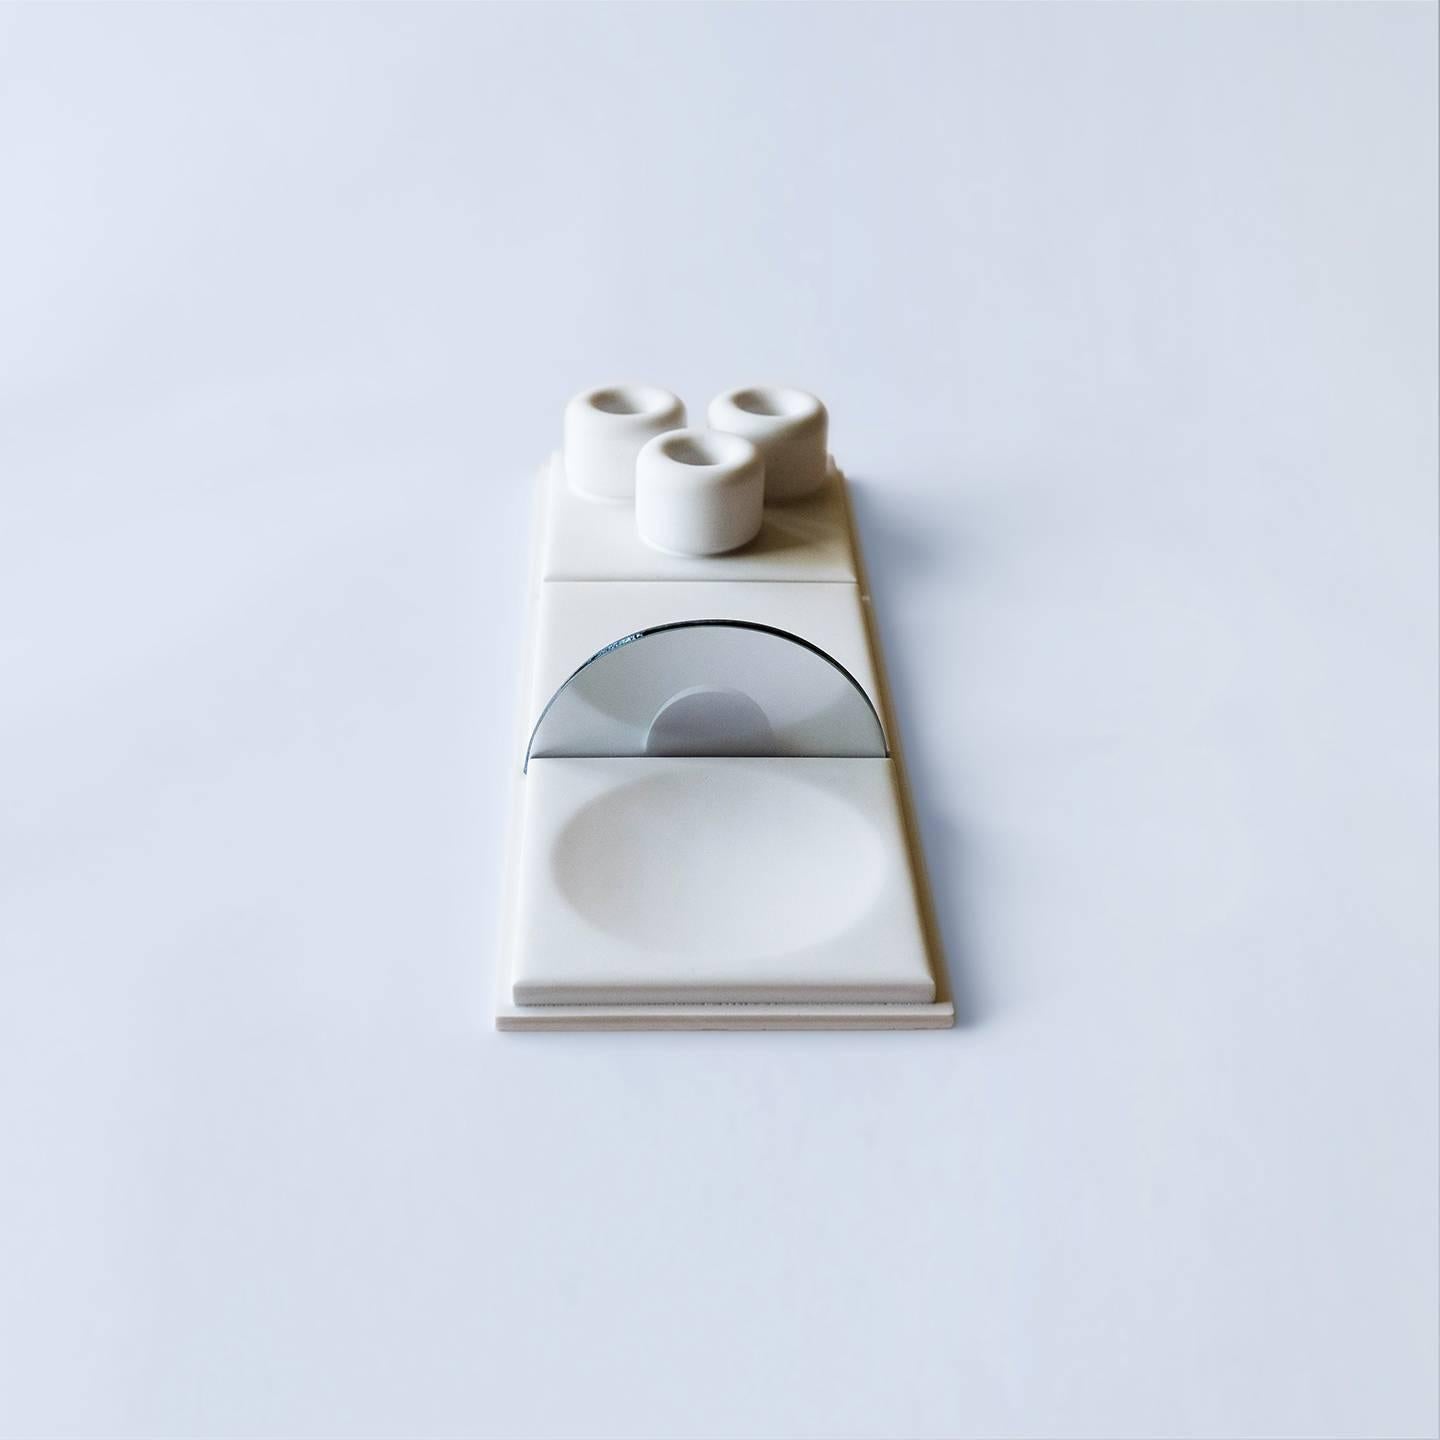 American Salle de Bain, Set of Three, Handmade Cast Concrete Tray in White by UMÉ Studio For Sale